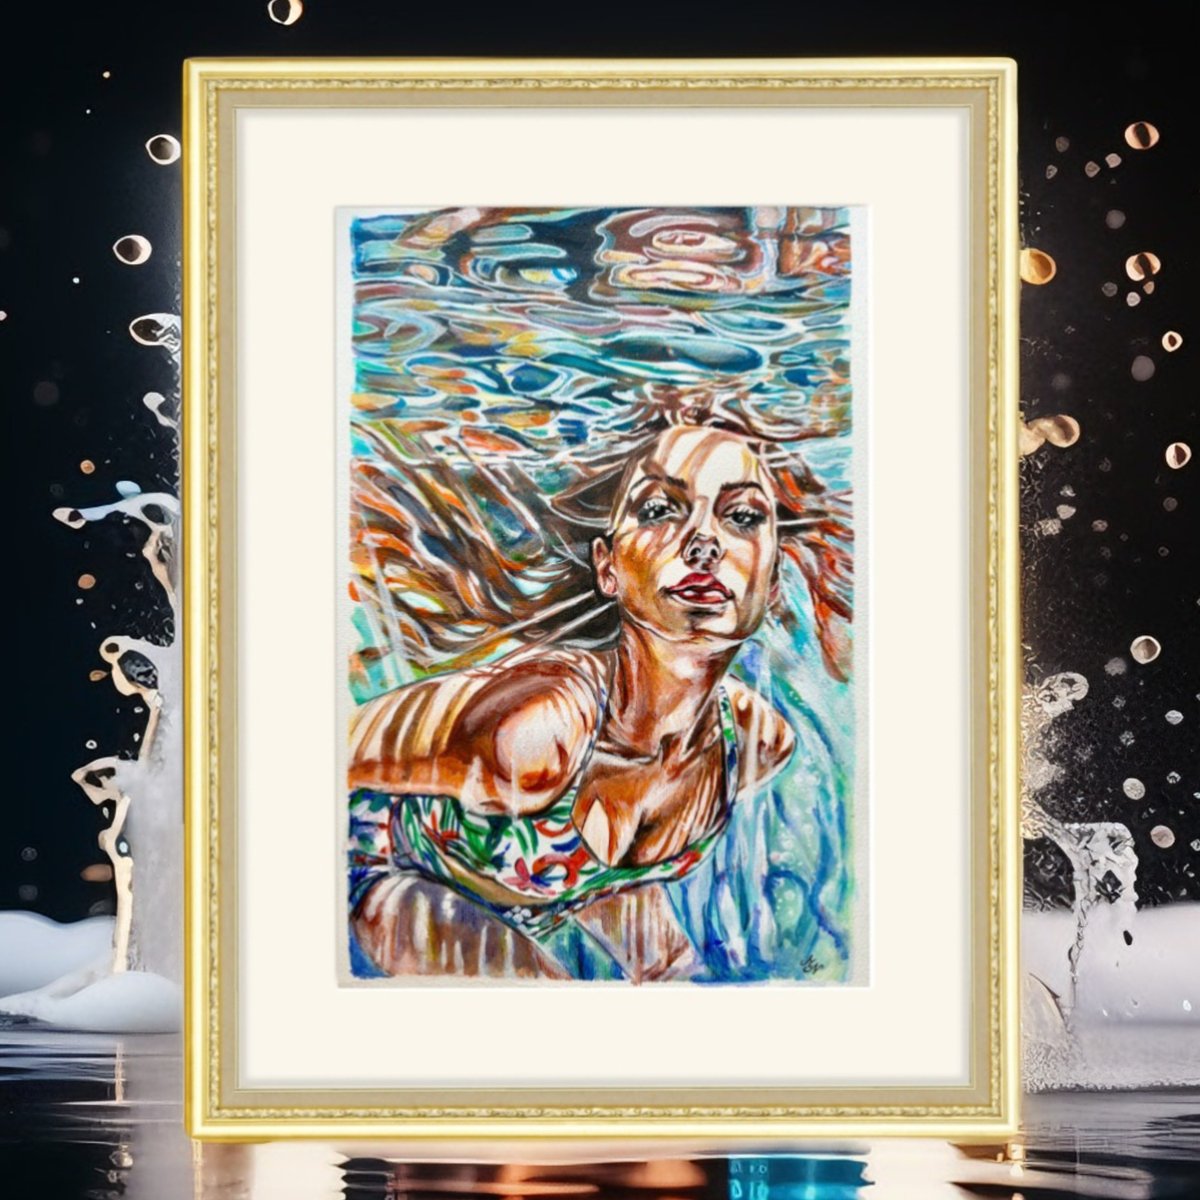 Explore the enchanting depths of the 'Underwater World' in this mesmerizing painting. 🌊 Dive into tranquility and elegance with this captivating artwork. #art #underwater #painting #tranquility #elegance artcursor.com/products/under…